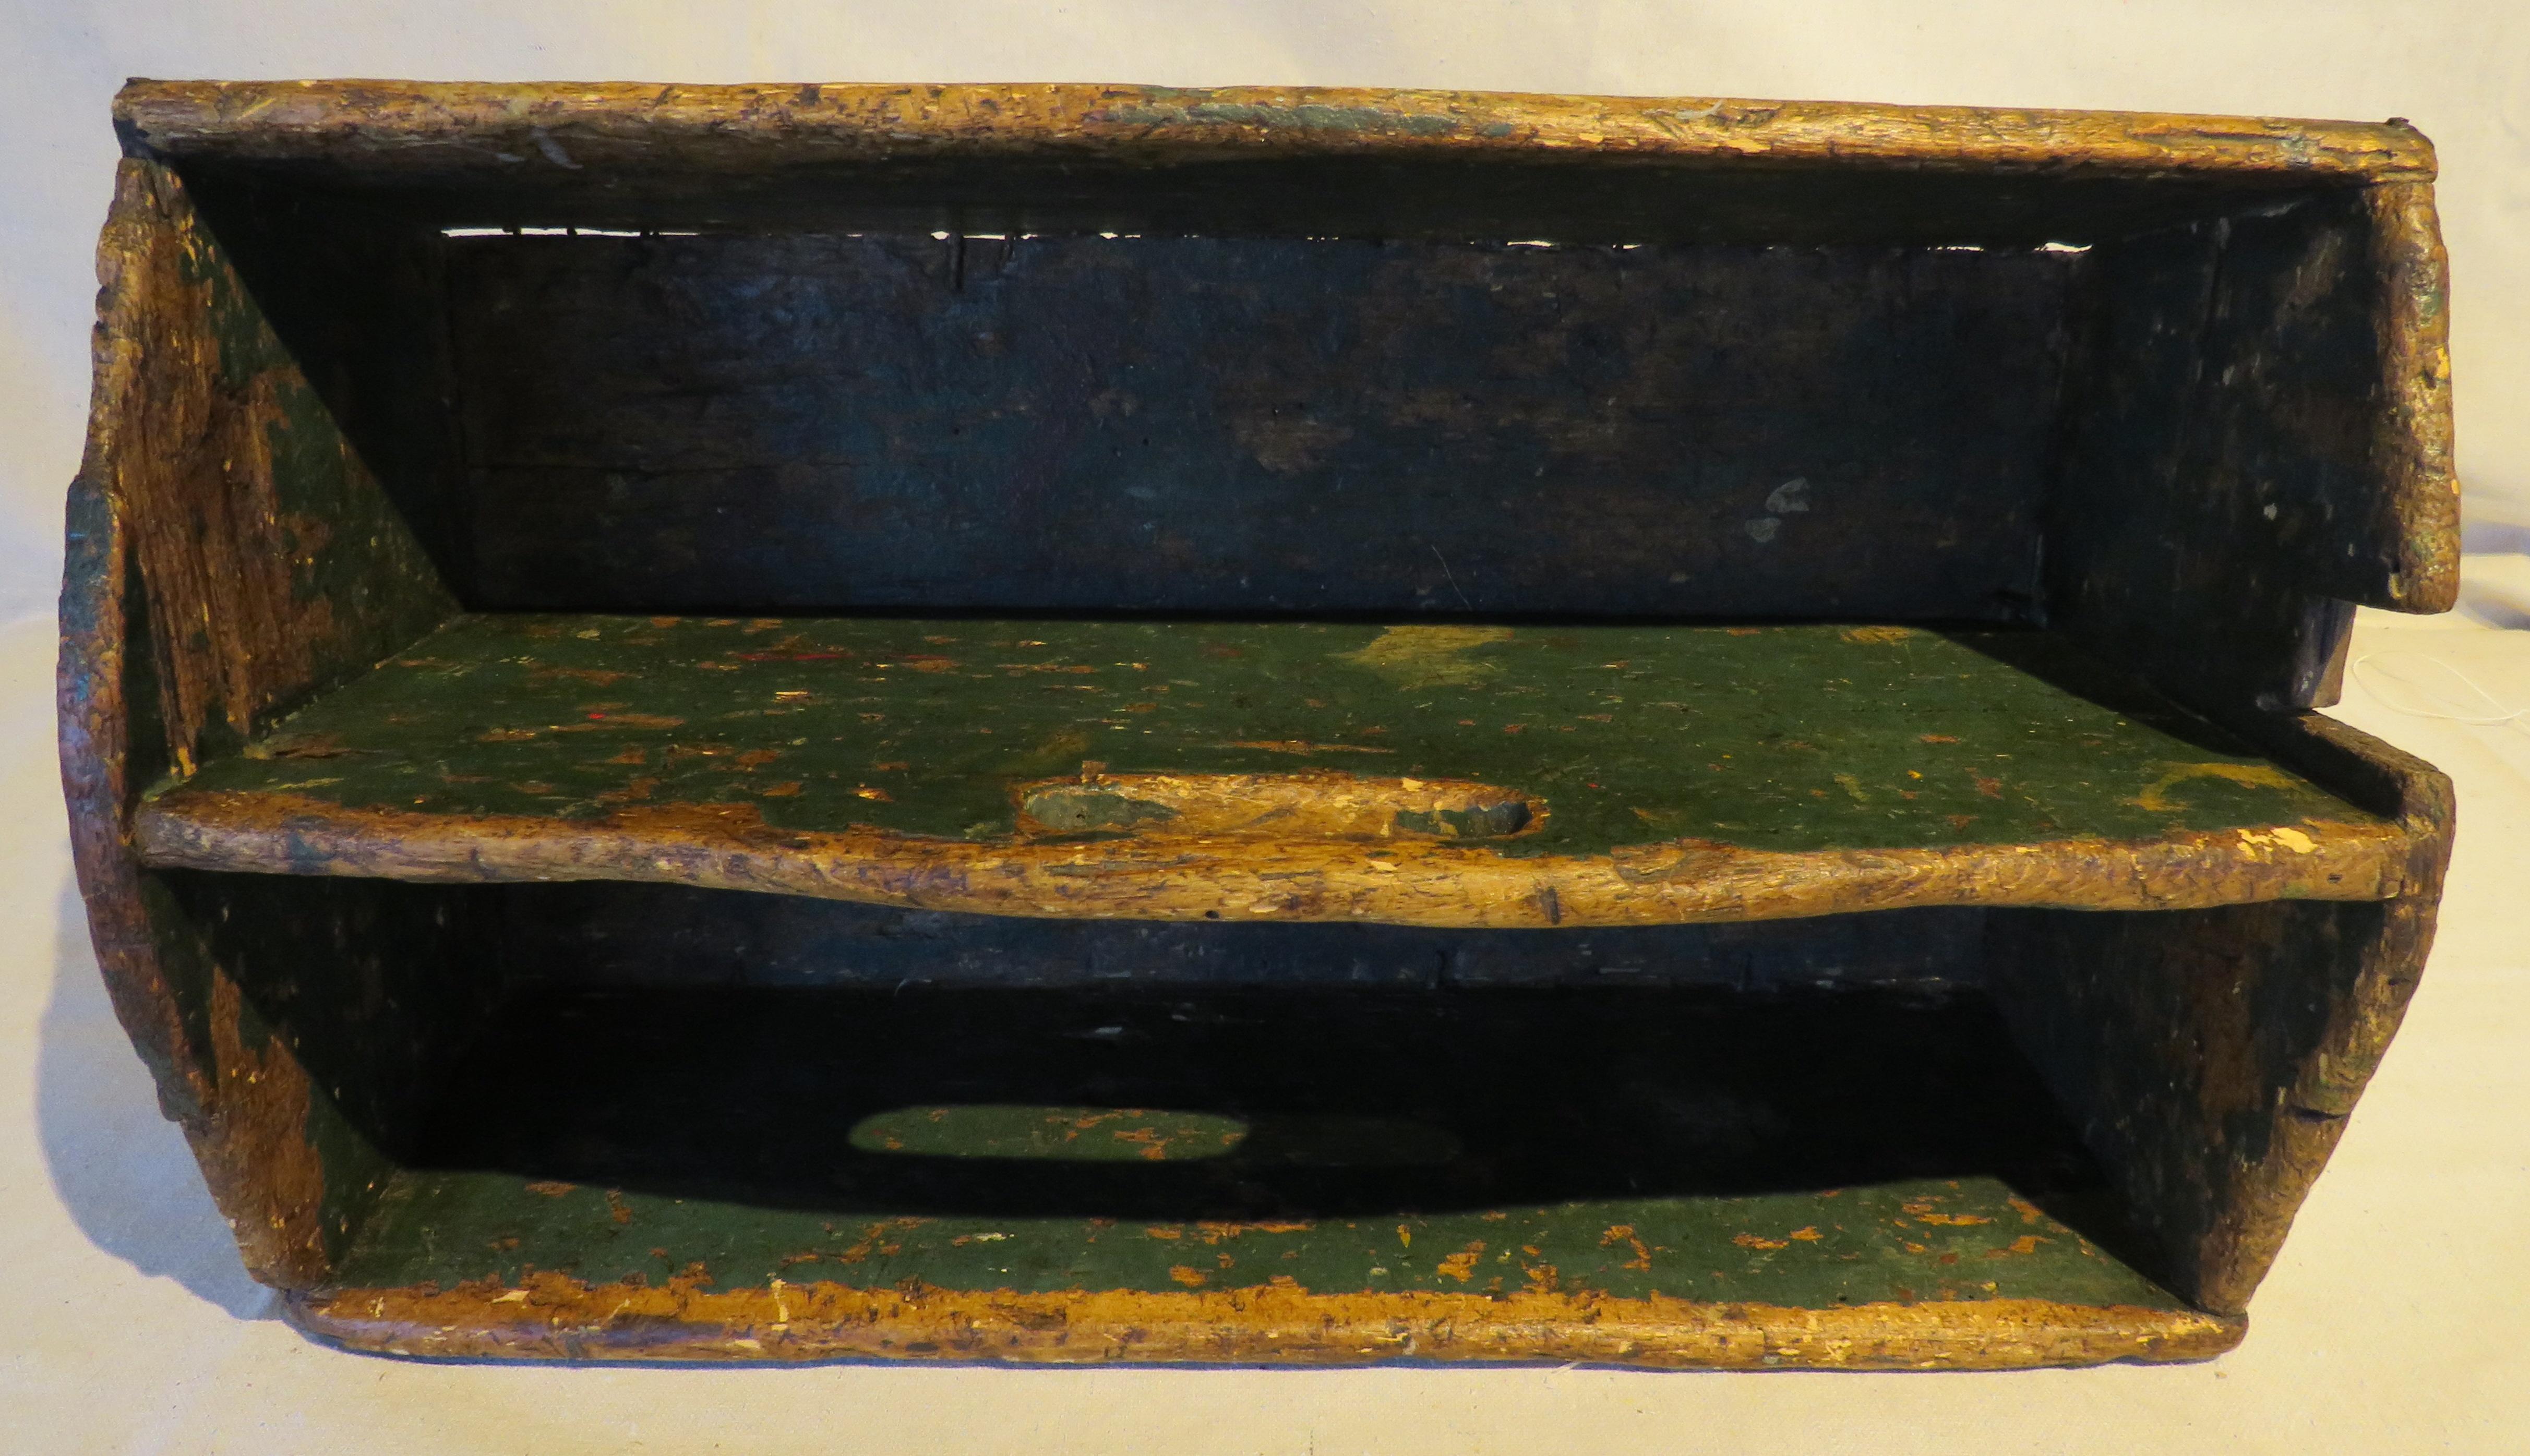 Hand-Crafted 19th Century Tool Carrier in Original Green Paint